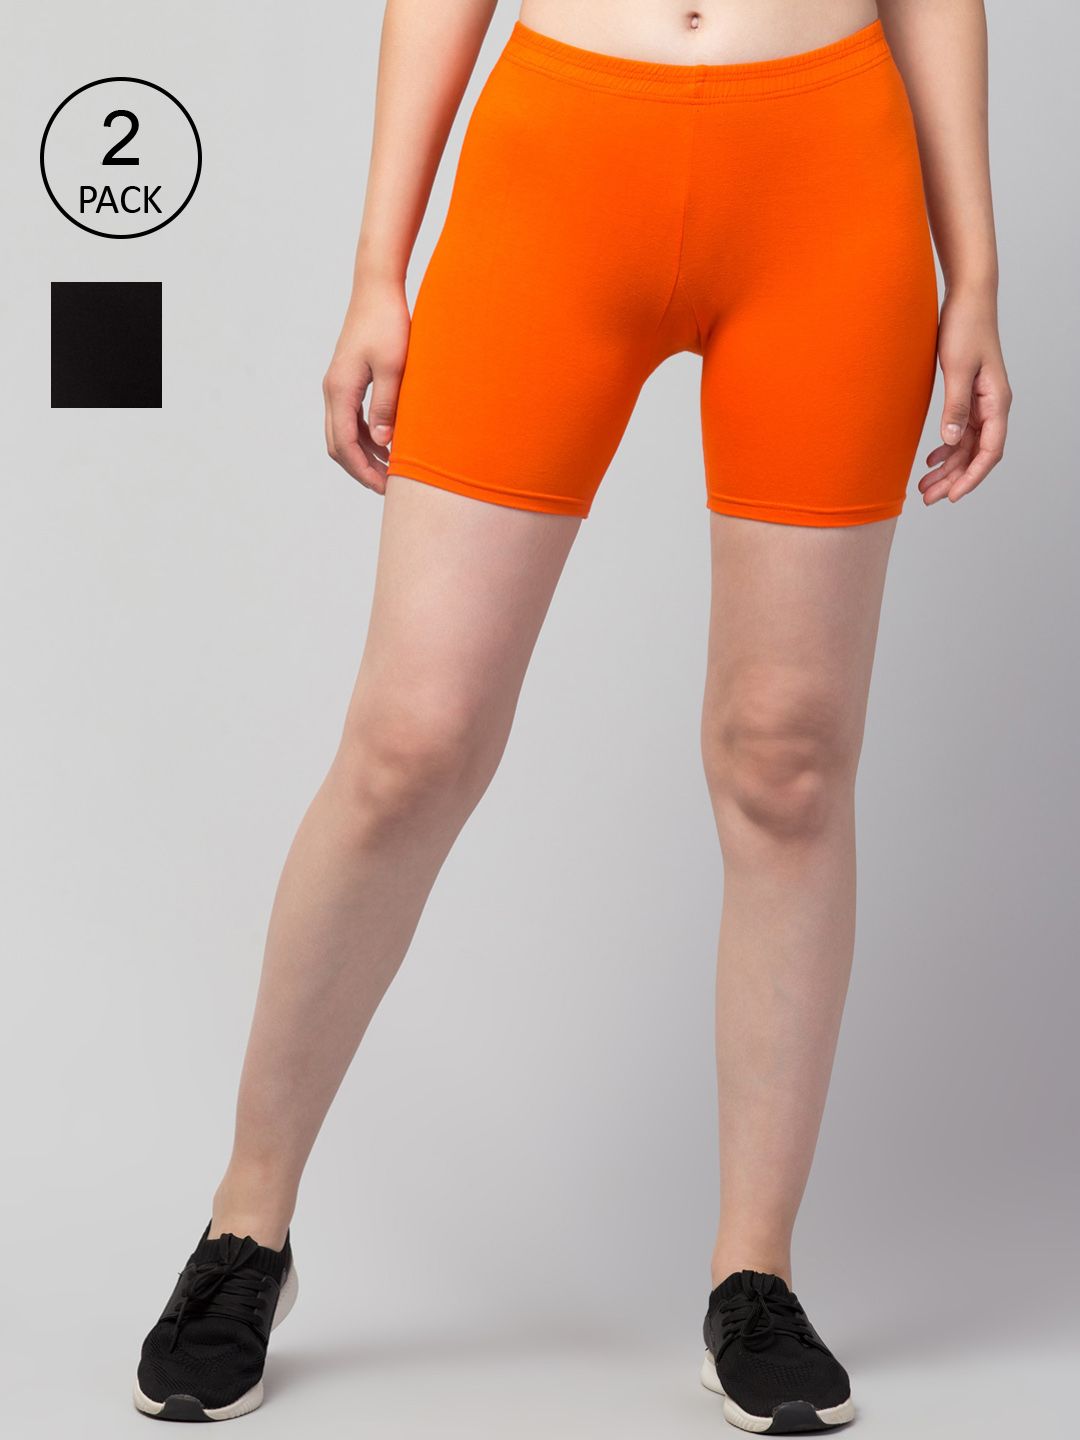 Apraa & Parma Pack Of 2 Women Slim Fit Cycling Sports Shorts Price in India